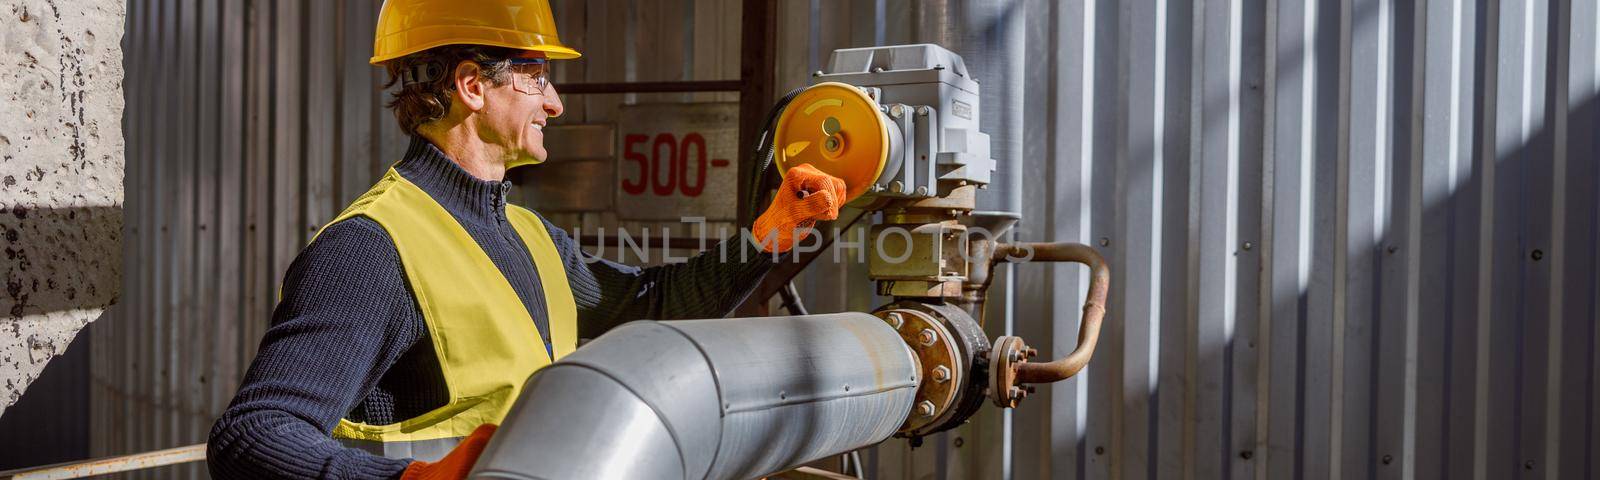 Cheerful matured man factory worker wearing work vest and gloves while standing near metal pipe and smiling